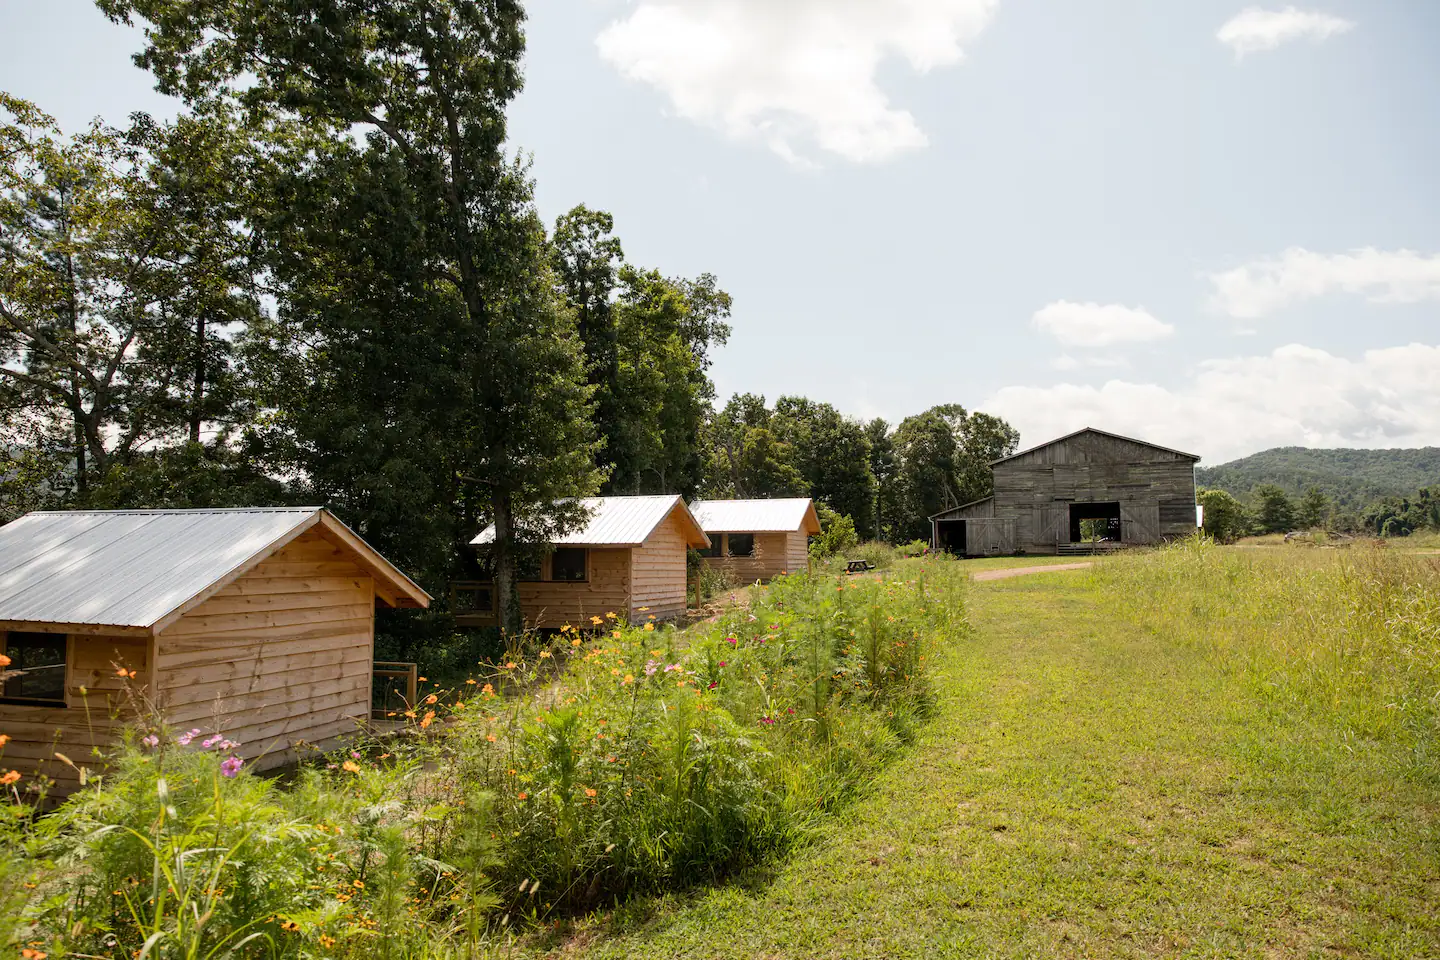 Paint Rock Farm Glamping Cabins